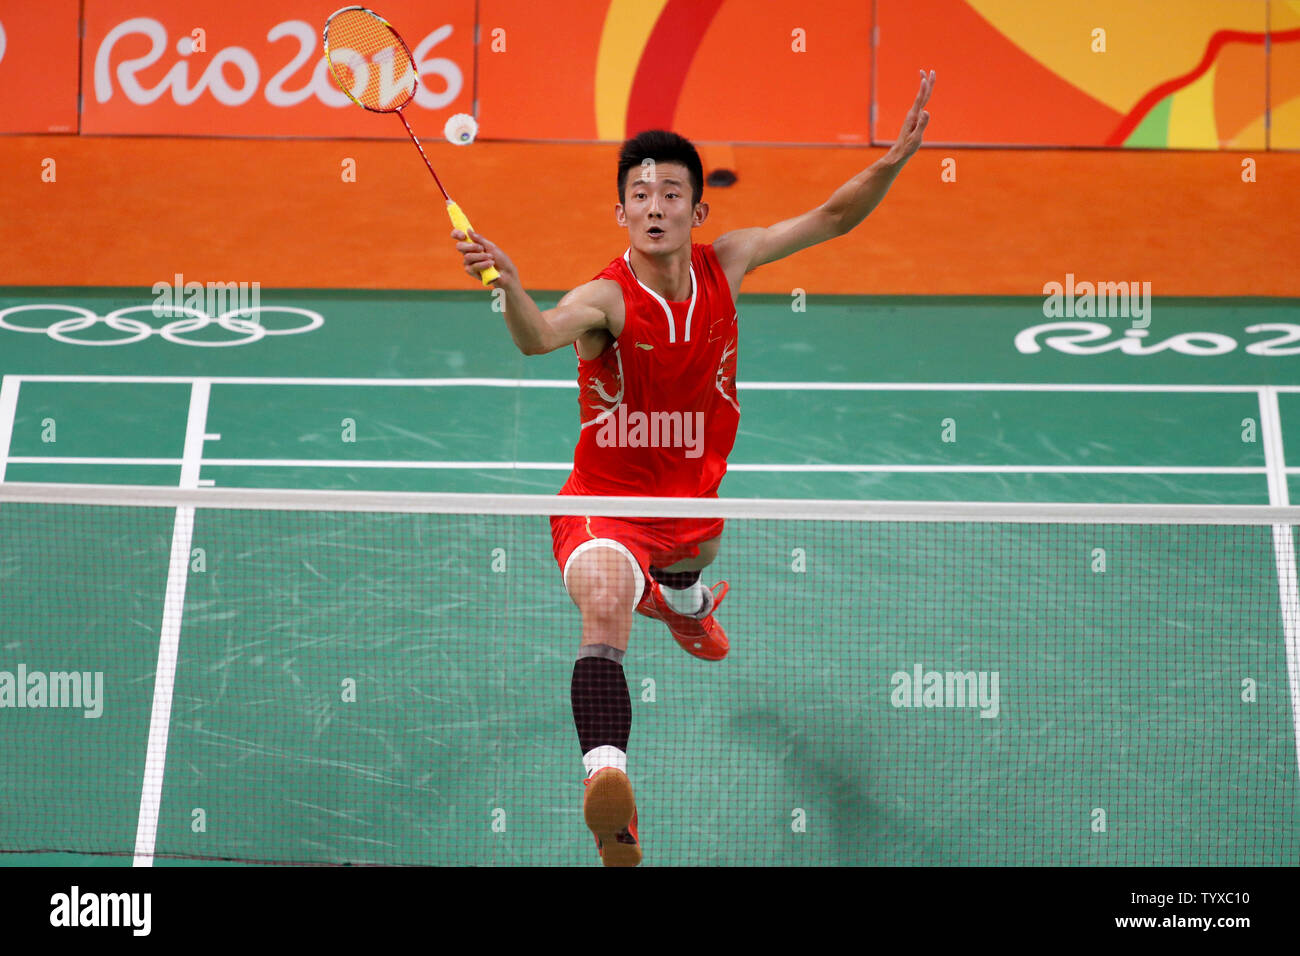 China's Long Chen takes on Malaysia's Chong Wei Lee (not pictured) in the Men's Badminton Singles gold medal match at the 2016 Rio Summer Olympics in Rio de Janeiro, Brazil, on August 20, 2016. Chen defeated Lee to win the gold medal.  Photo by Matthew Healey/UPI Stock Photo